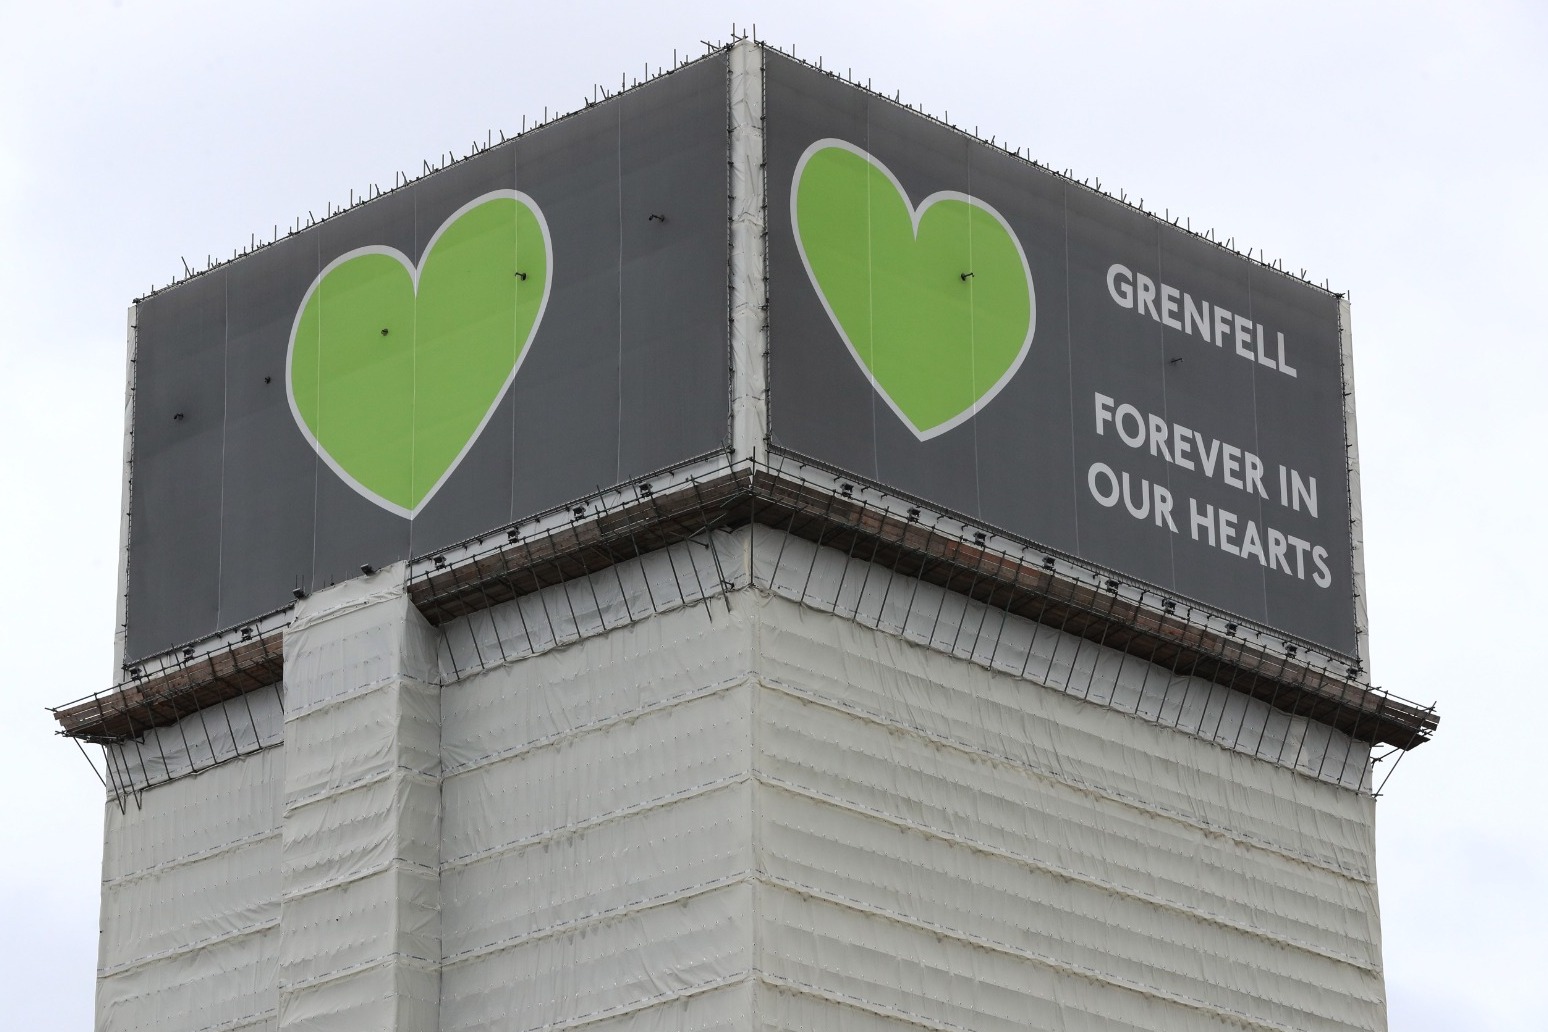 Grenfell survivors say removal timing needs to be their decision 